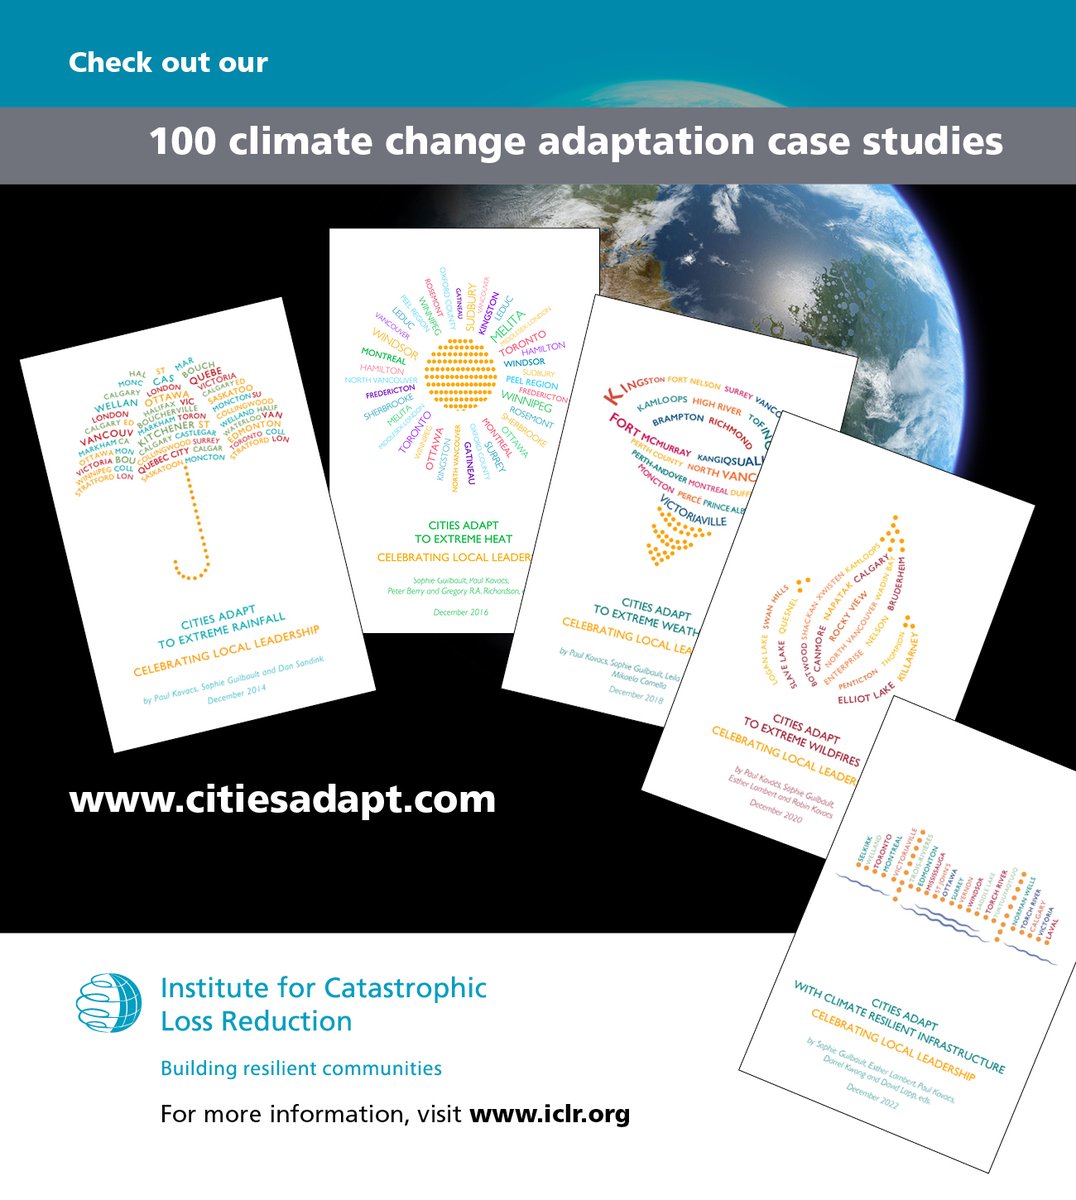 We have 100 case studies on actions taken by Canadian communities of all sizes to make themselves more resilient to climate change. Check them out at iclr.org/citiesadapt